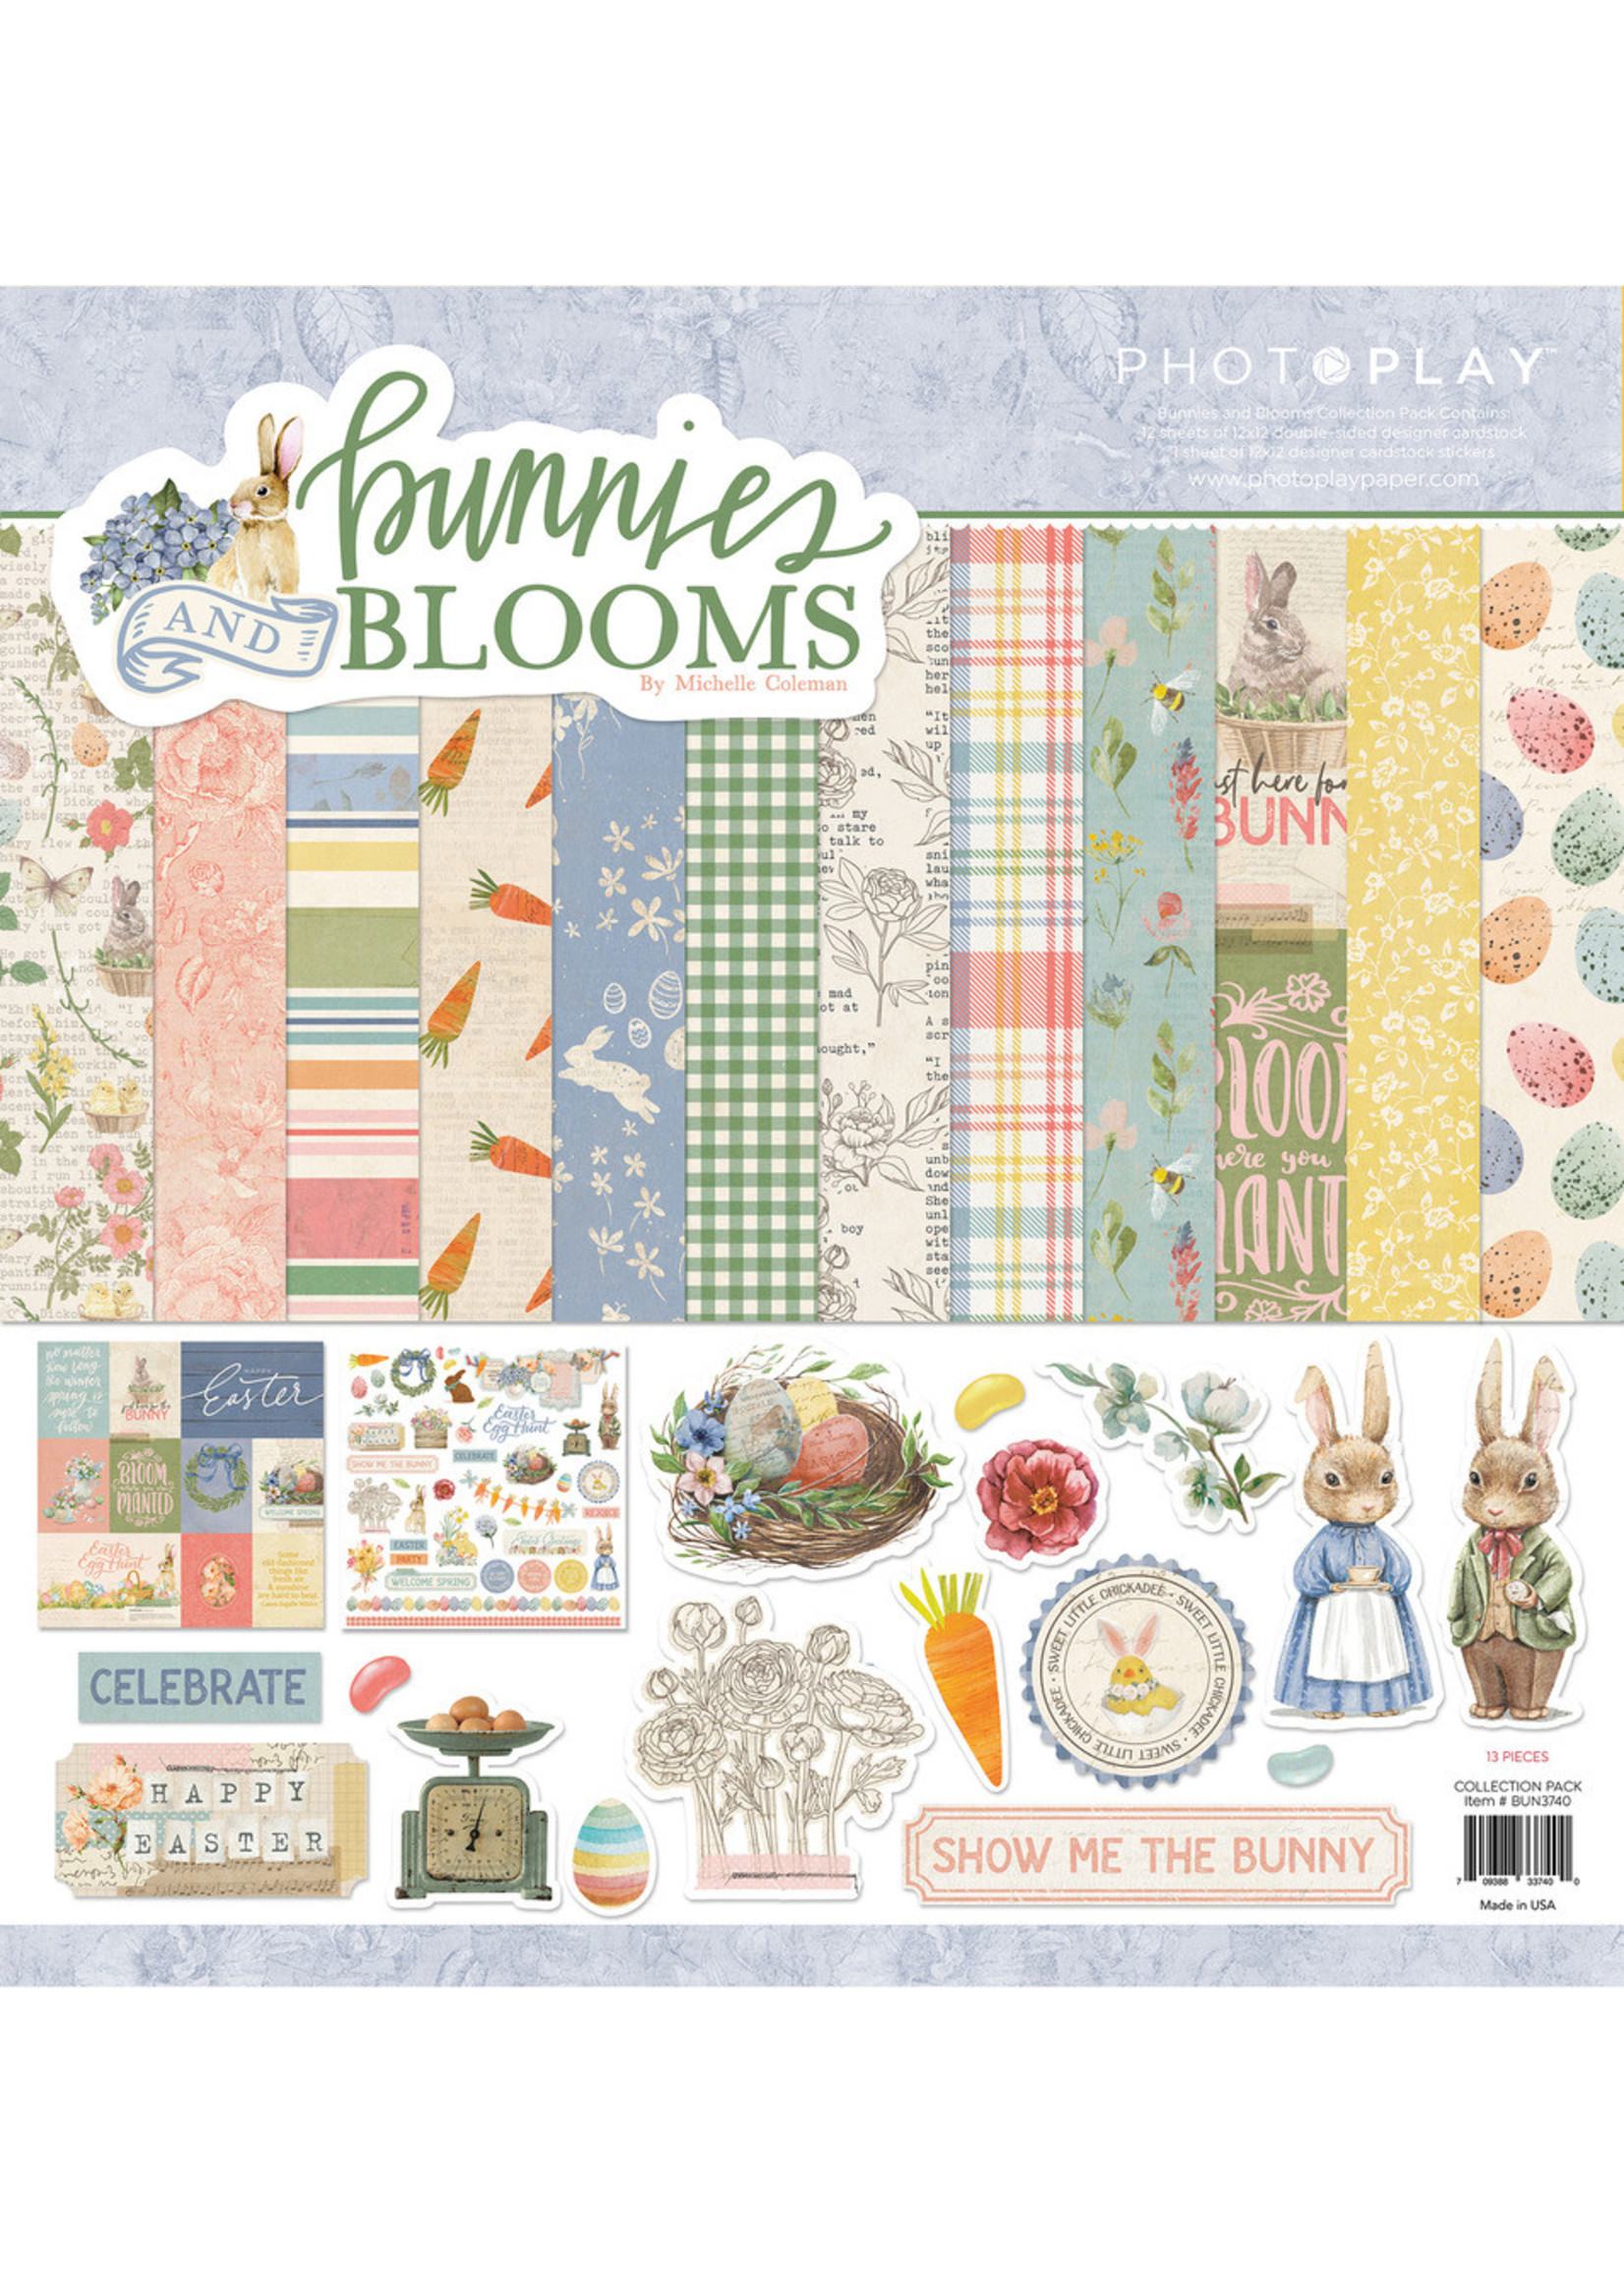 PHOTOPLAY Bunnies and Blooms 12x12 Collection Pack